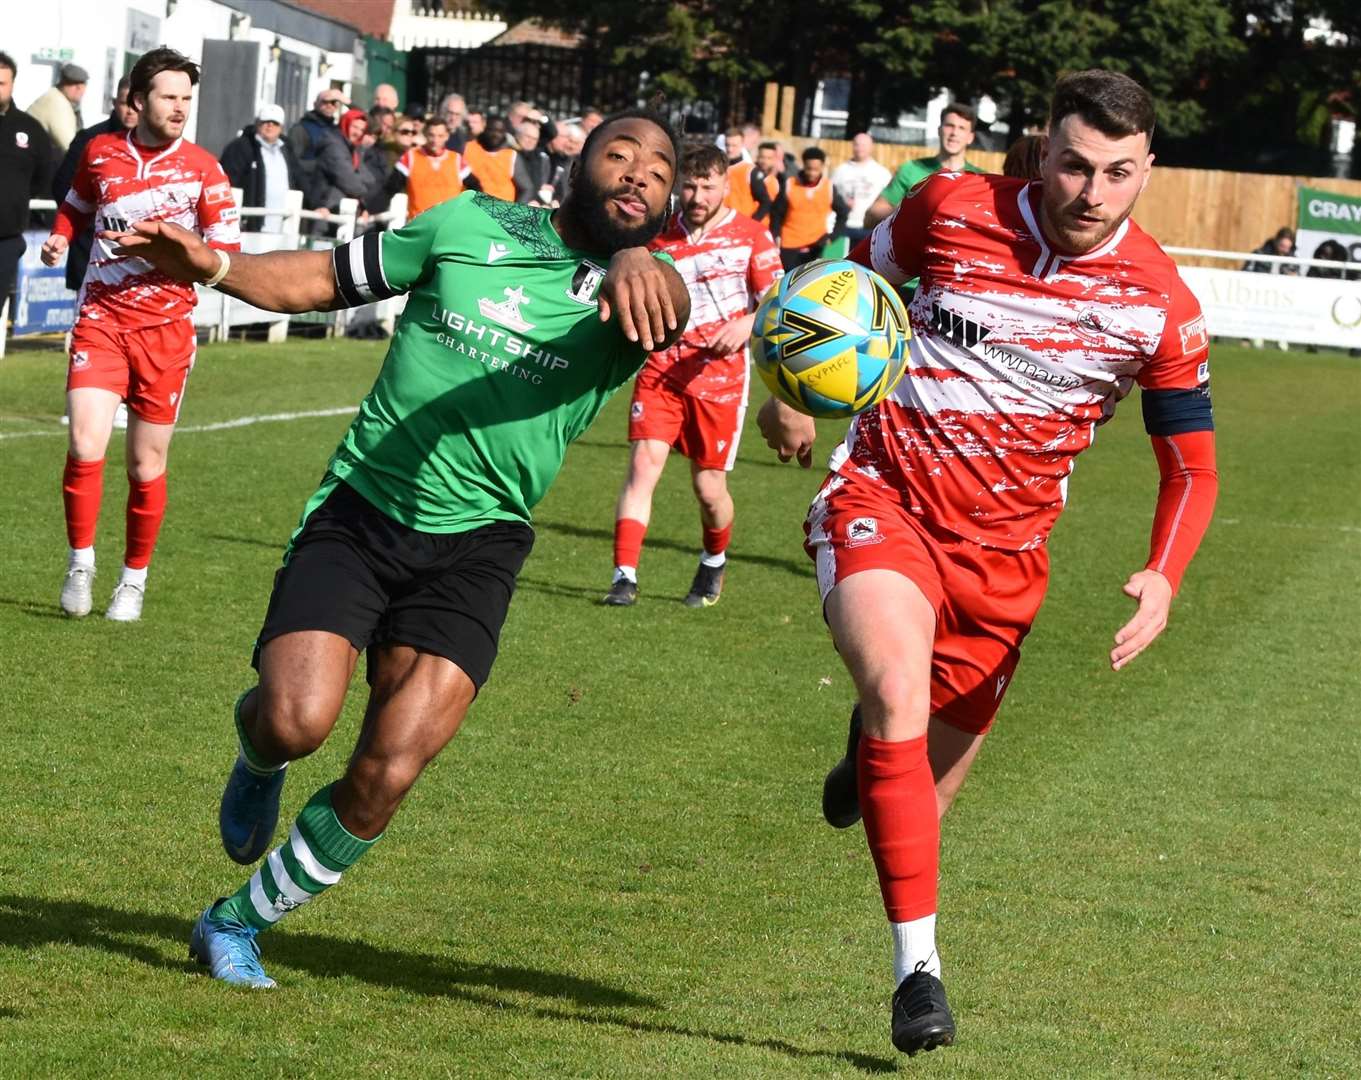 Ramsgate's Jake McIntyre shields the ball during their defeat at Cray Valley, manager Matt Longhurst's last game in charge. Picture: Alan Coomes